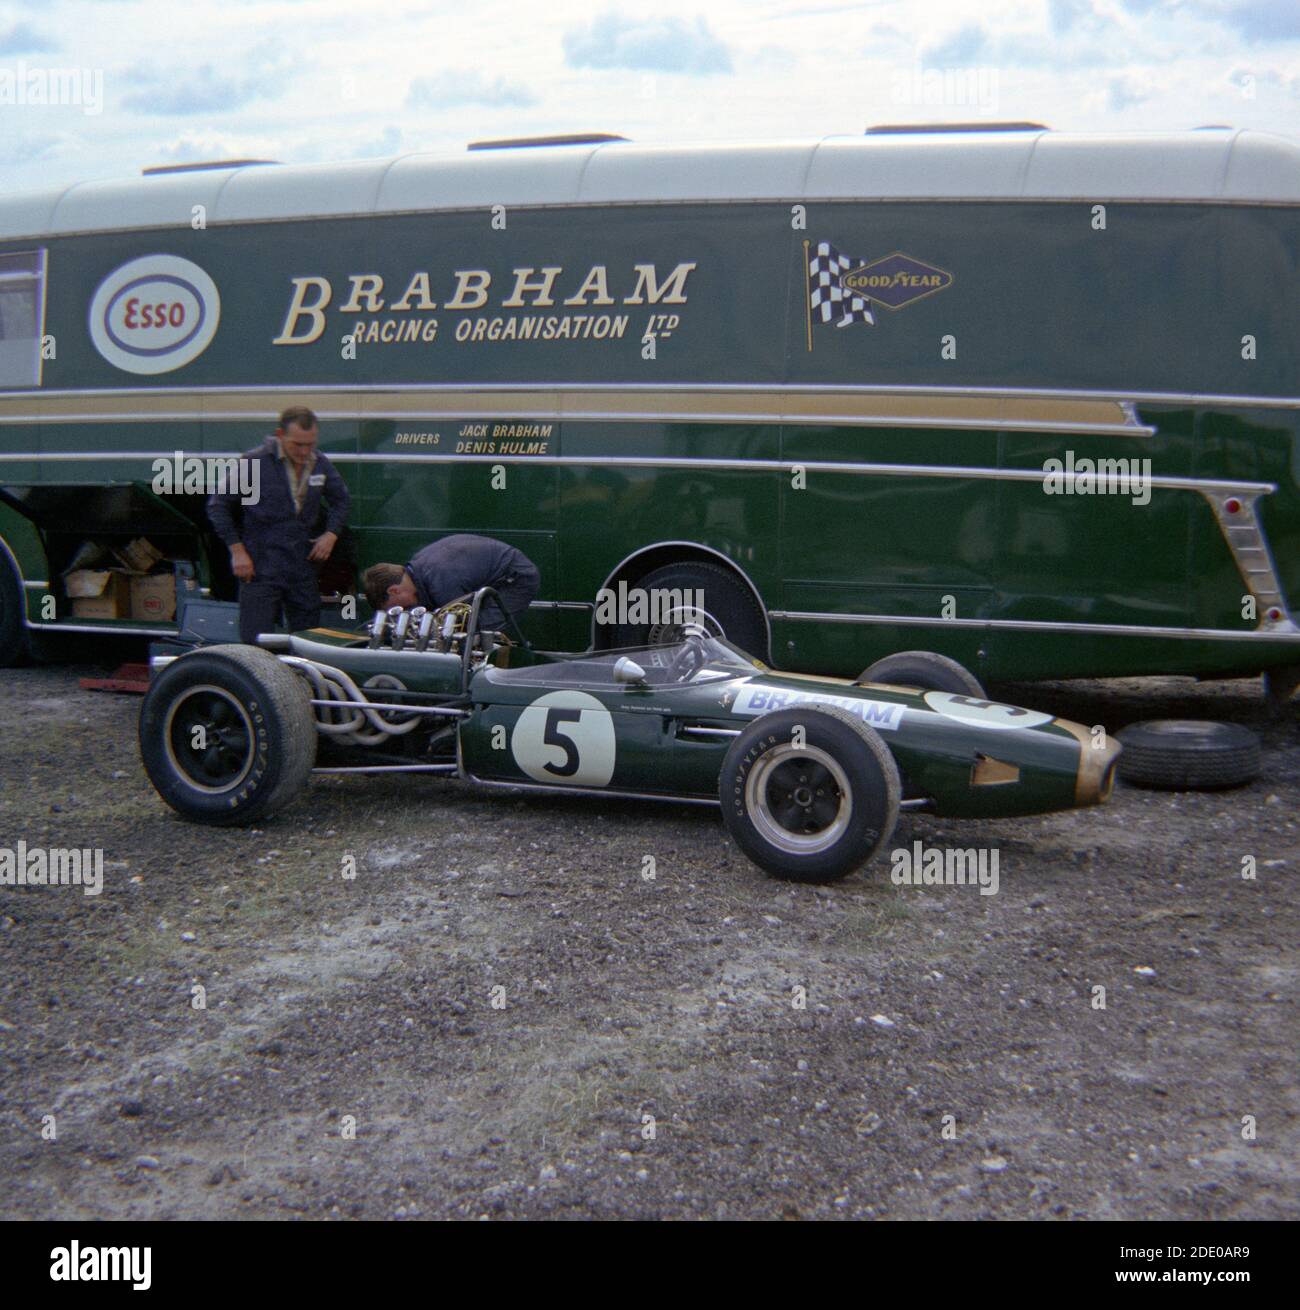 Brabham-Repco Formula 1 car in the paddock at Brands Hatch Practice for the 1966 British Grand Prix, 15th July. Jack Brabham won the race next day Stock Photo